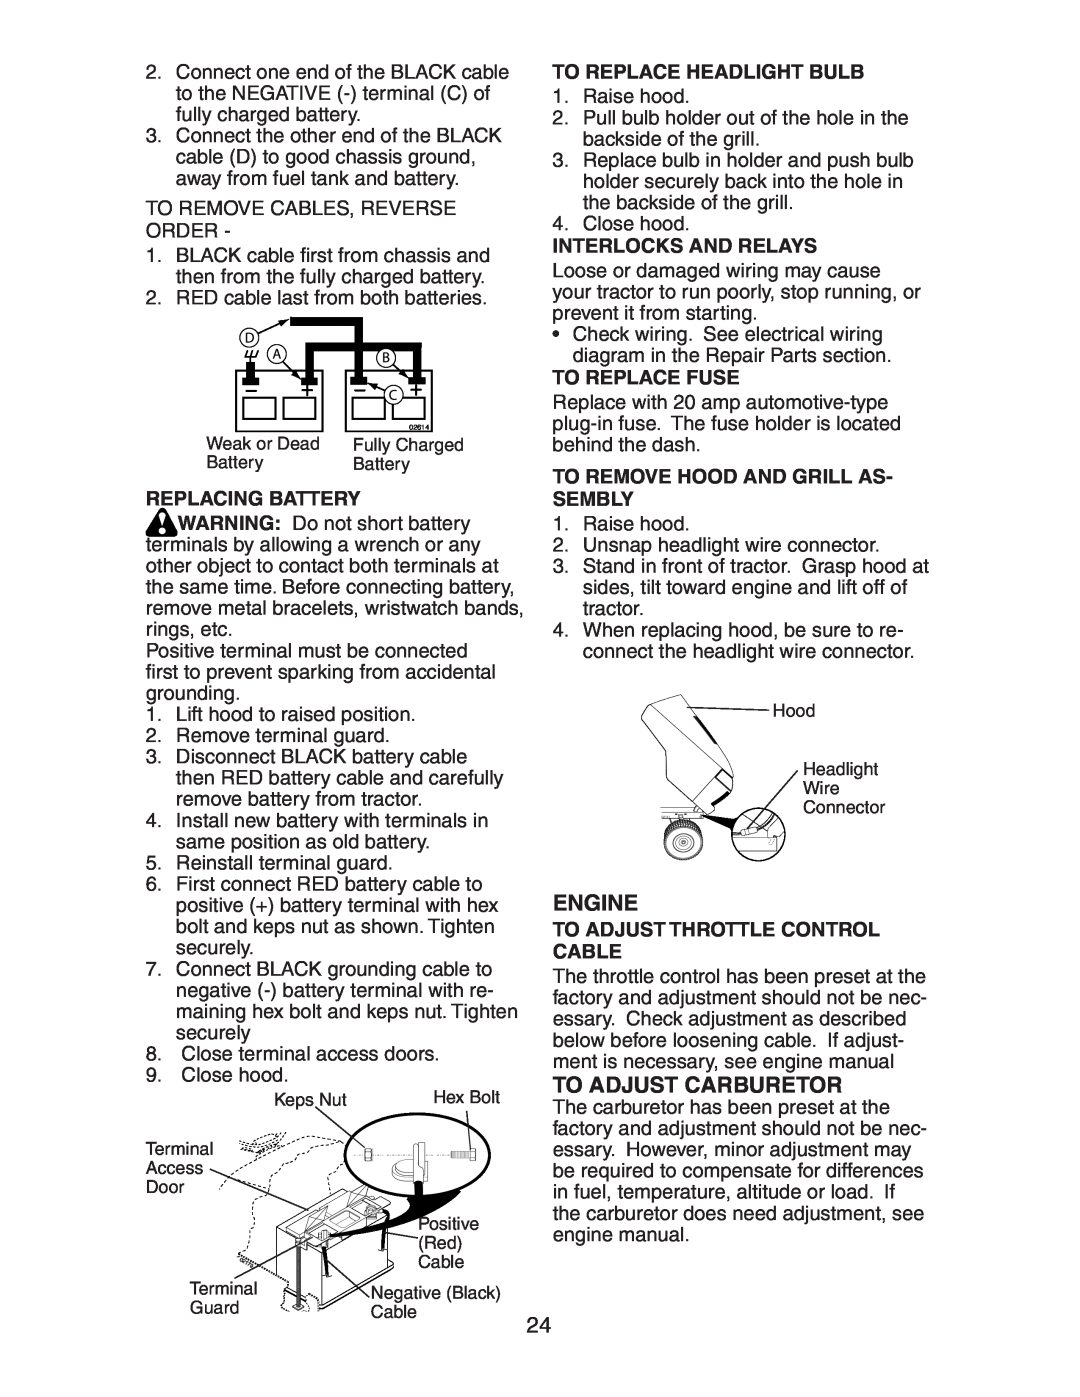 Poulan CO18542STC manual To Replace Headlight Bulb, Interlocks And Relays, Replacing Battery, To Replace Fuse 